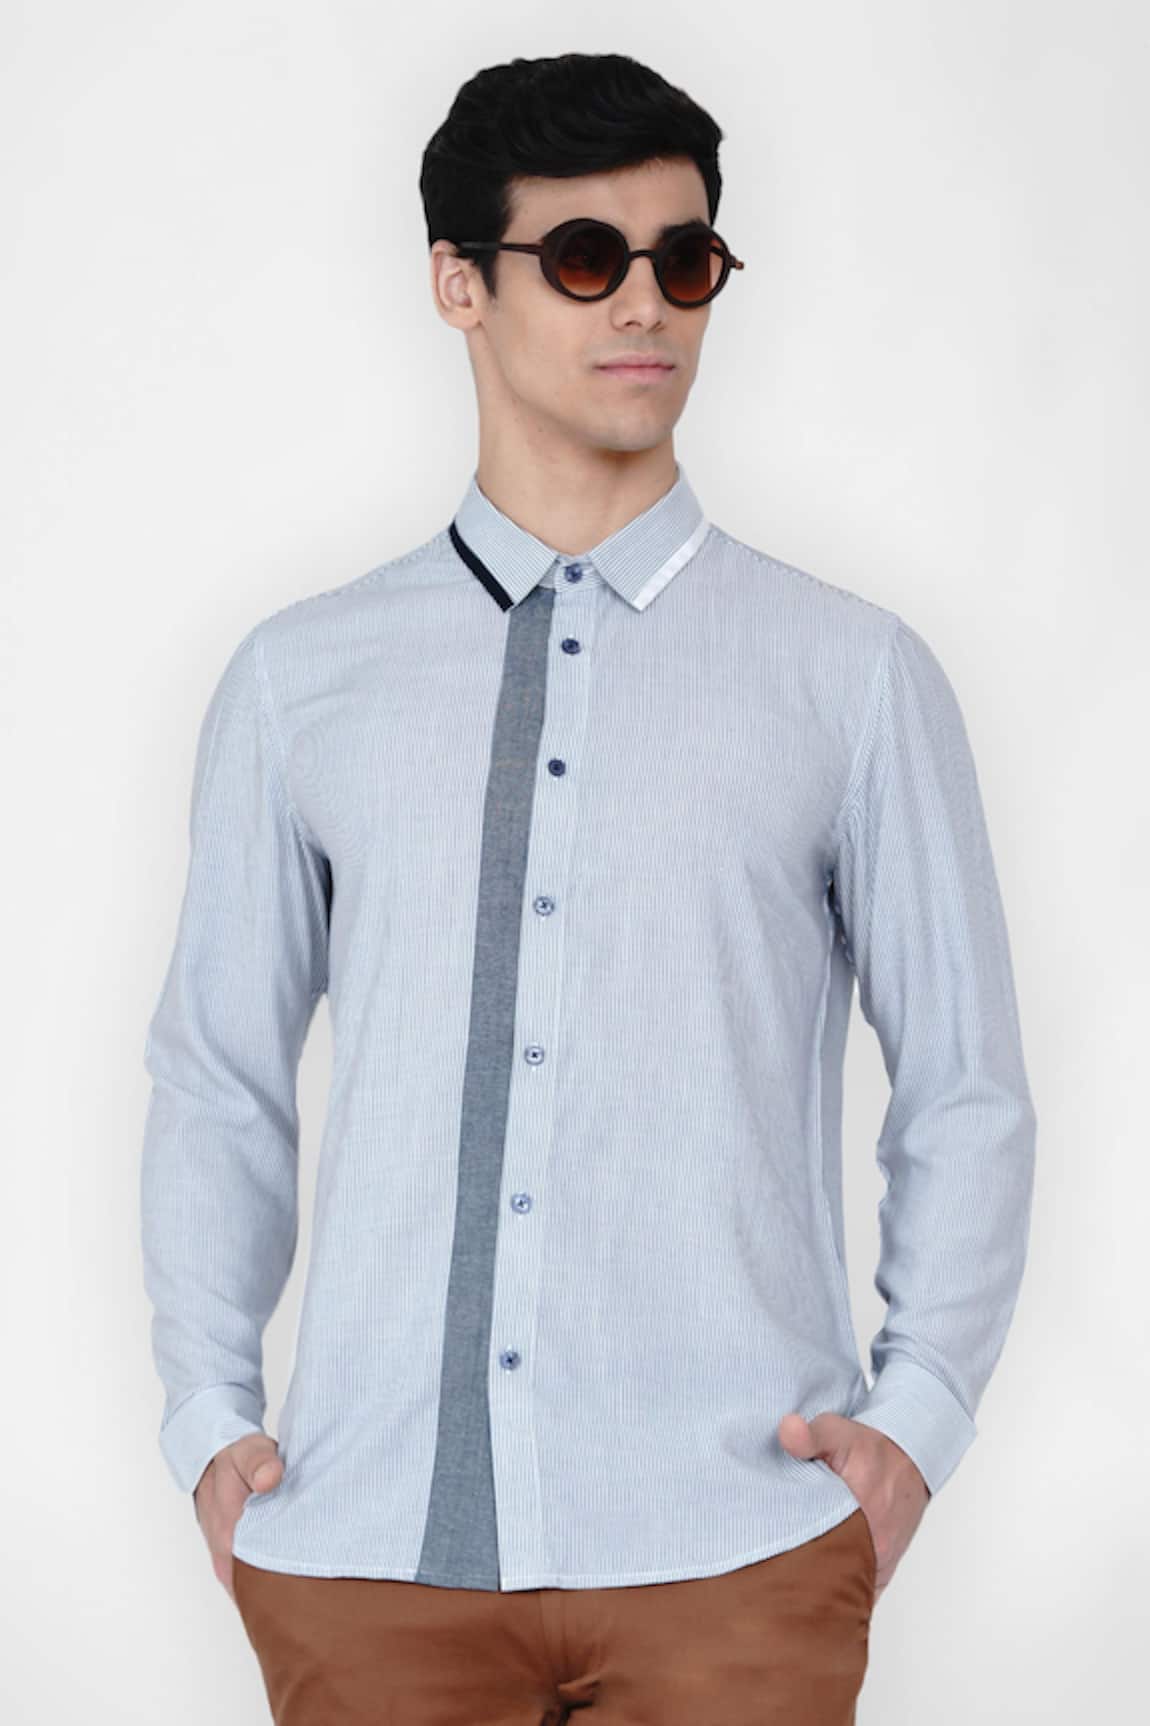 Lacquer Embassy Striped Casual Shirt